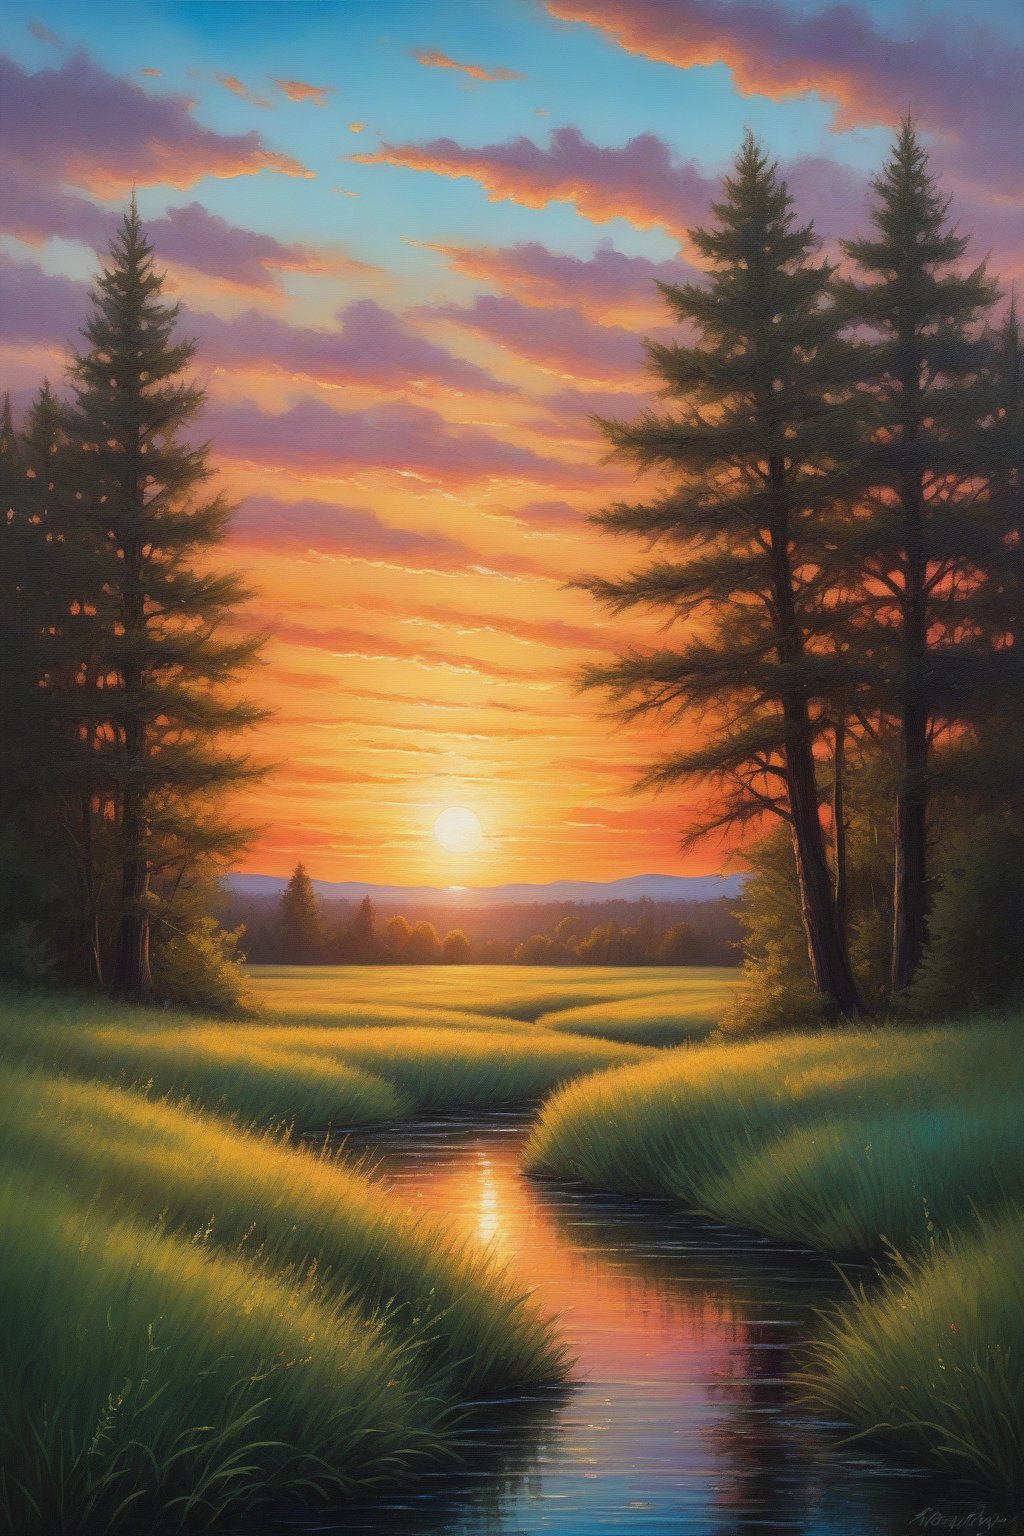 soft rustle of the sunset, extremely detailed oil painting, an oil painting, american scene painting, old book style illustration,  lush, mysterious, bioluminescent, serene, digital mirrorless camera, capturing the vibrant colors and unique textures of the environments